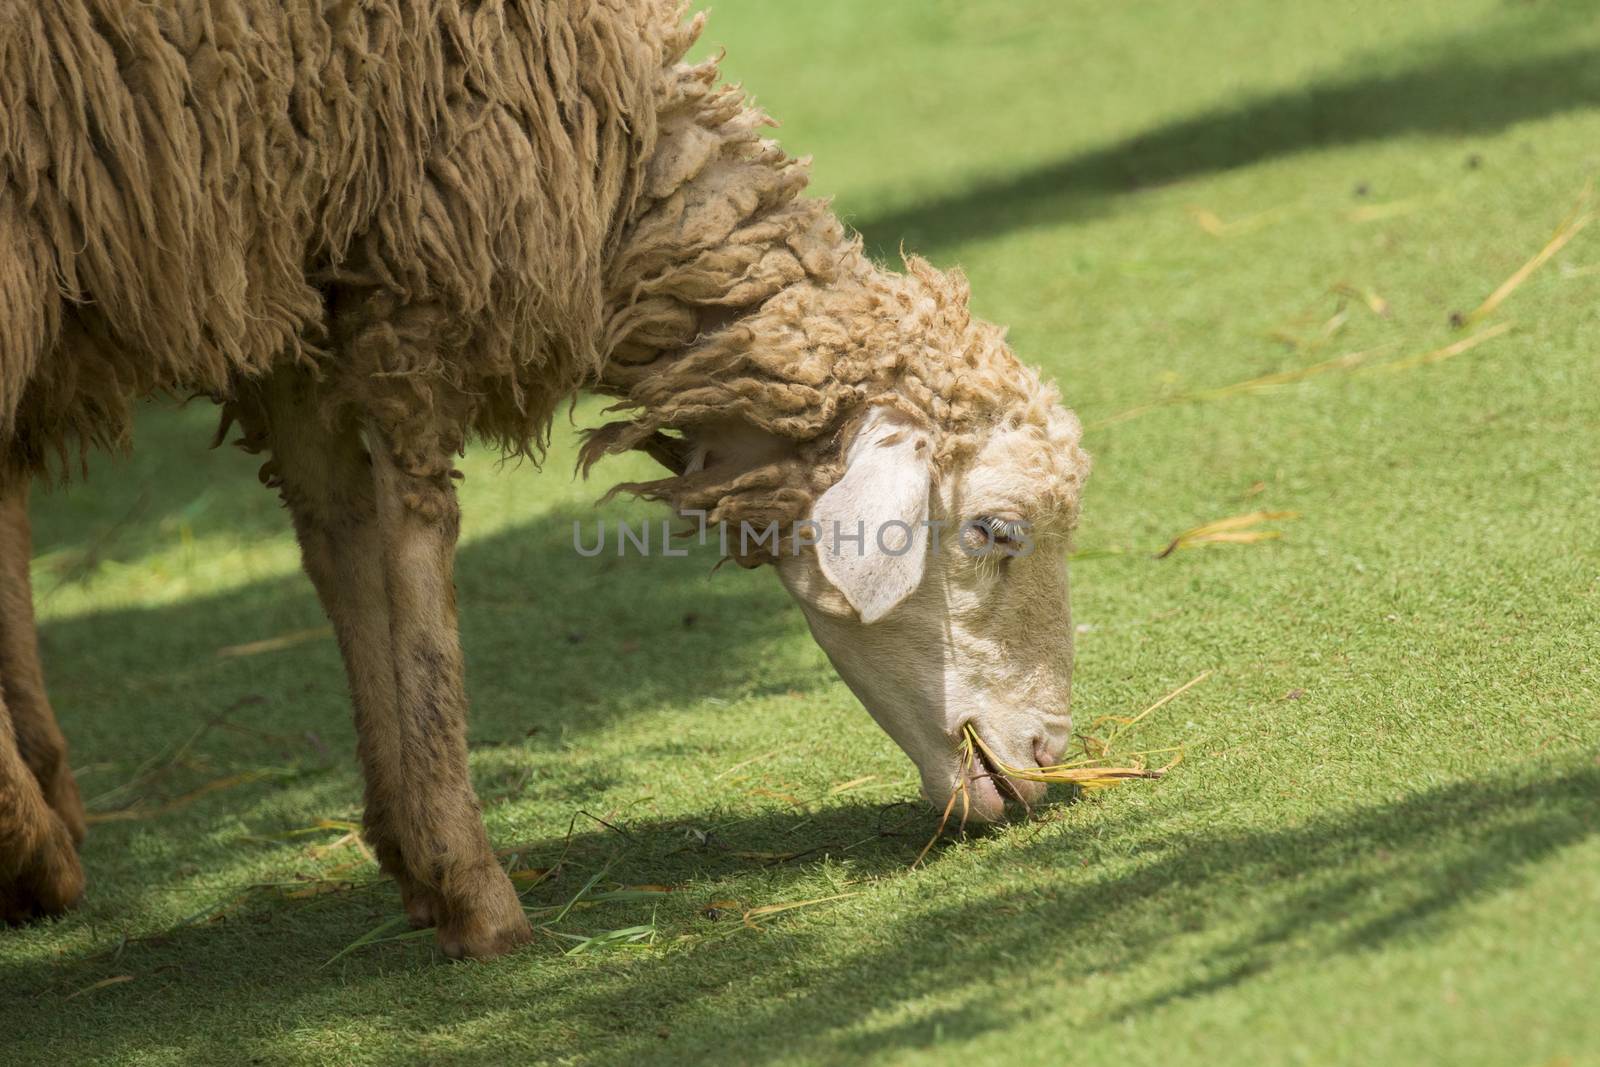 Image of a brown sheep munching grass in farm.